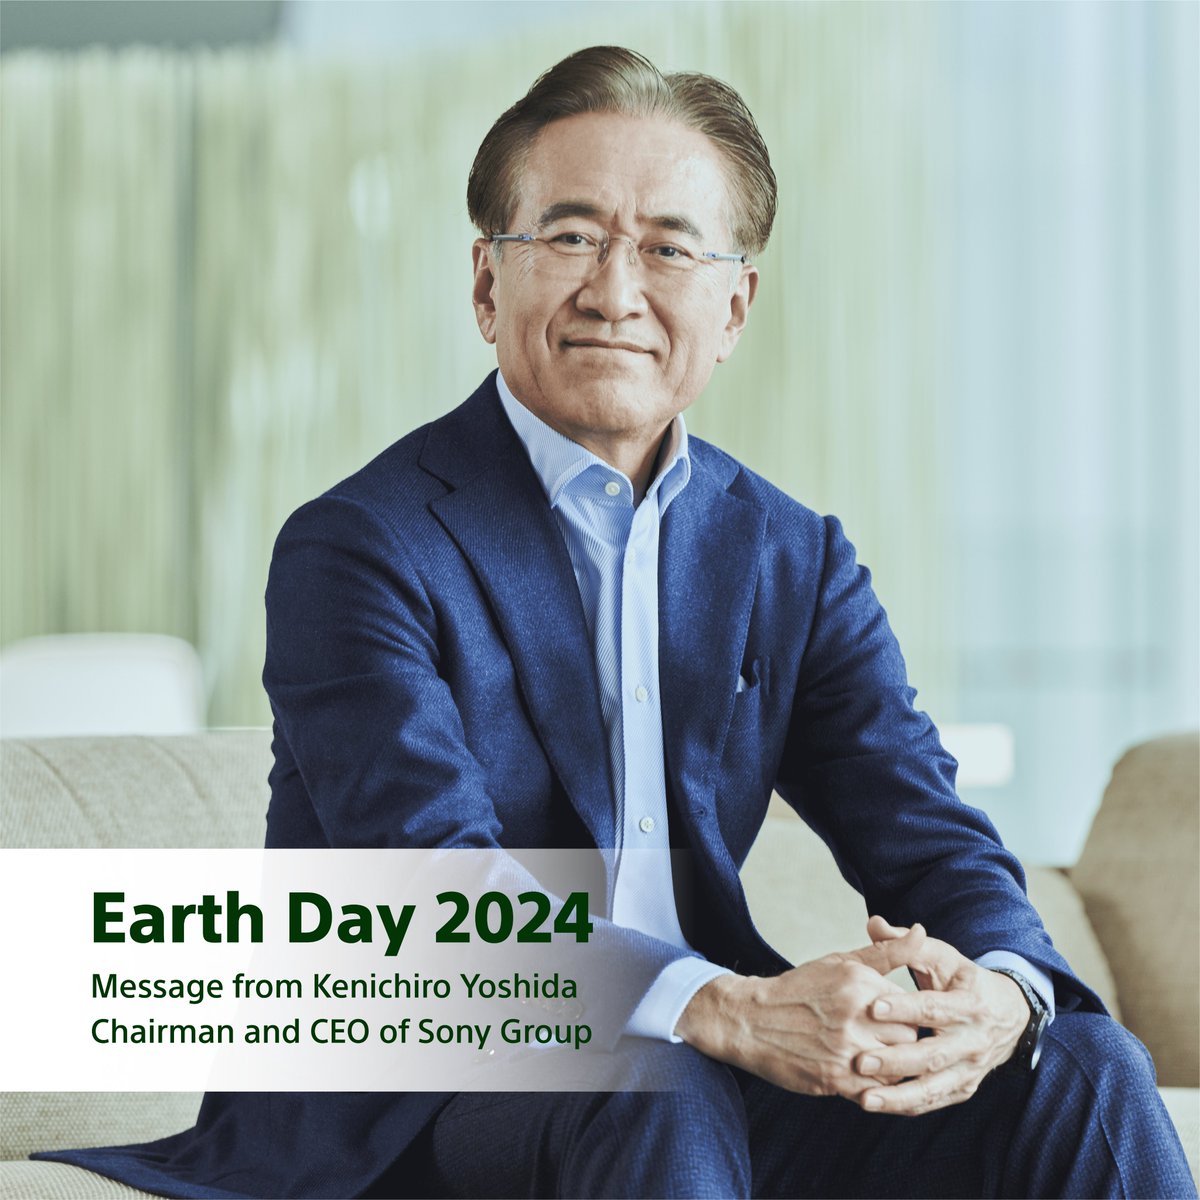 April 22 is #EarthDay, a day to think about the planet on which we live. Today, we introduce various initiatives related to this year’s Earth Day theme “Planet vs. Plastic,” along with a message from Kenichiro Yoshida, Chairman and CEO, Sony Group. Learn more: